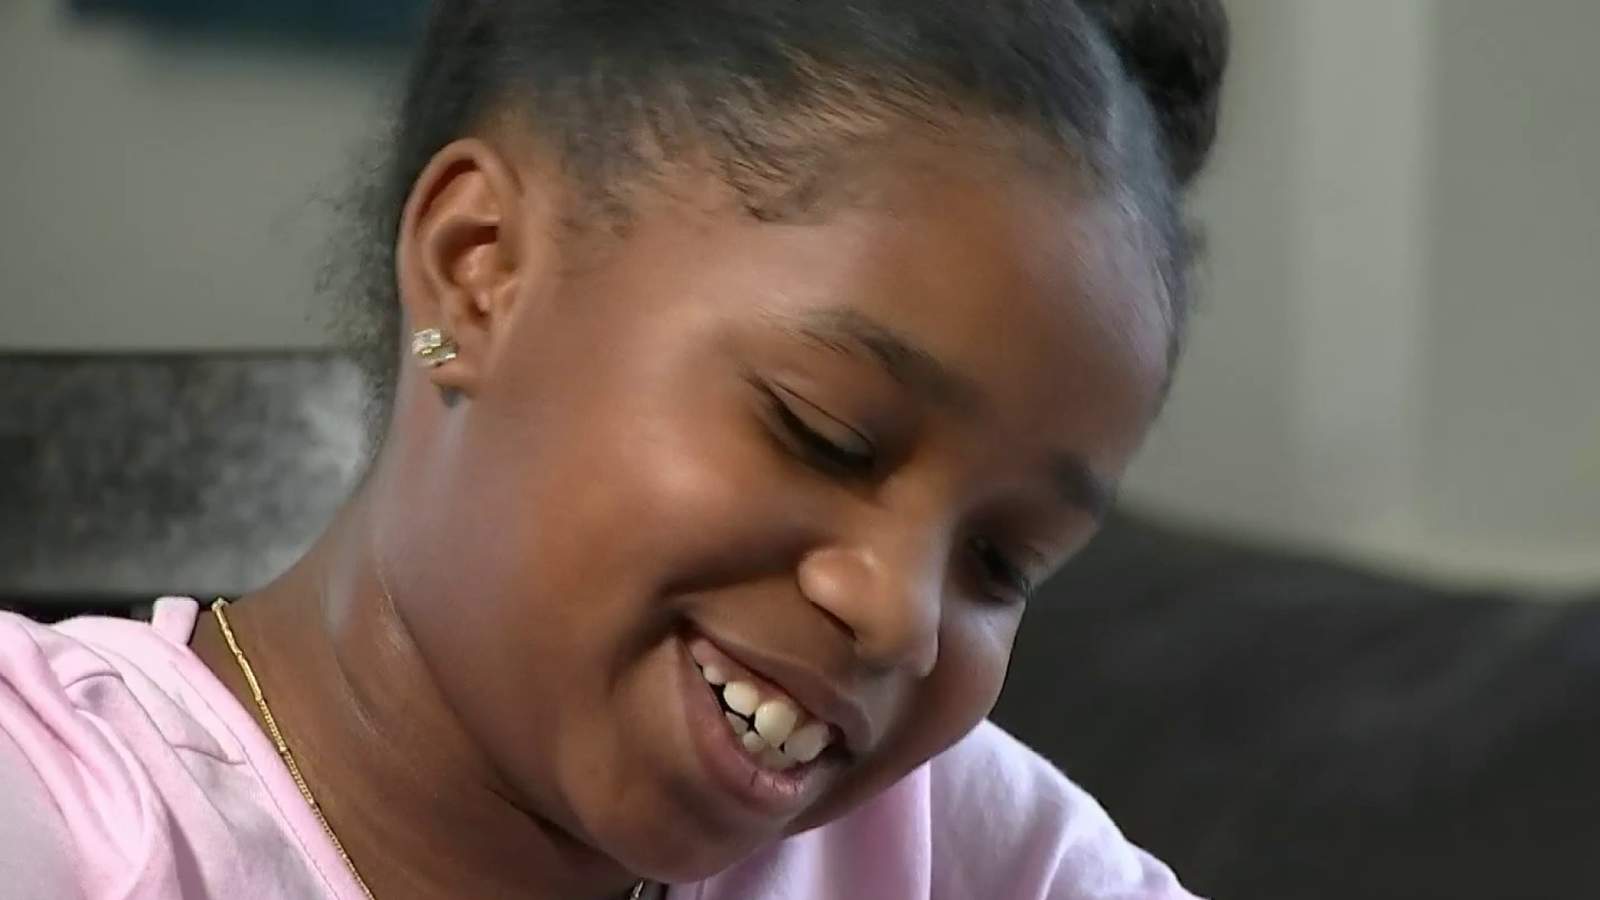 This 9-year-old girl is turning her love of arts and crafts into an inspirational movement